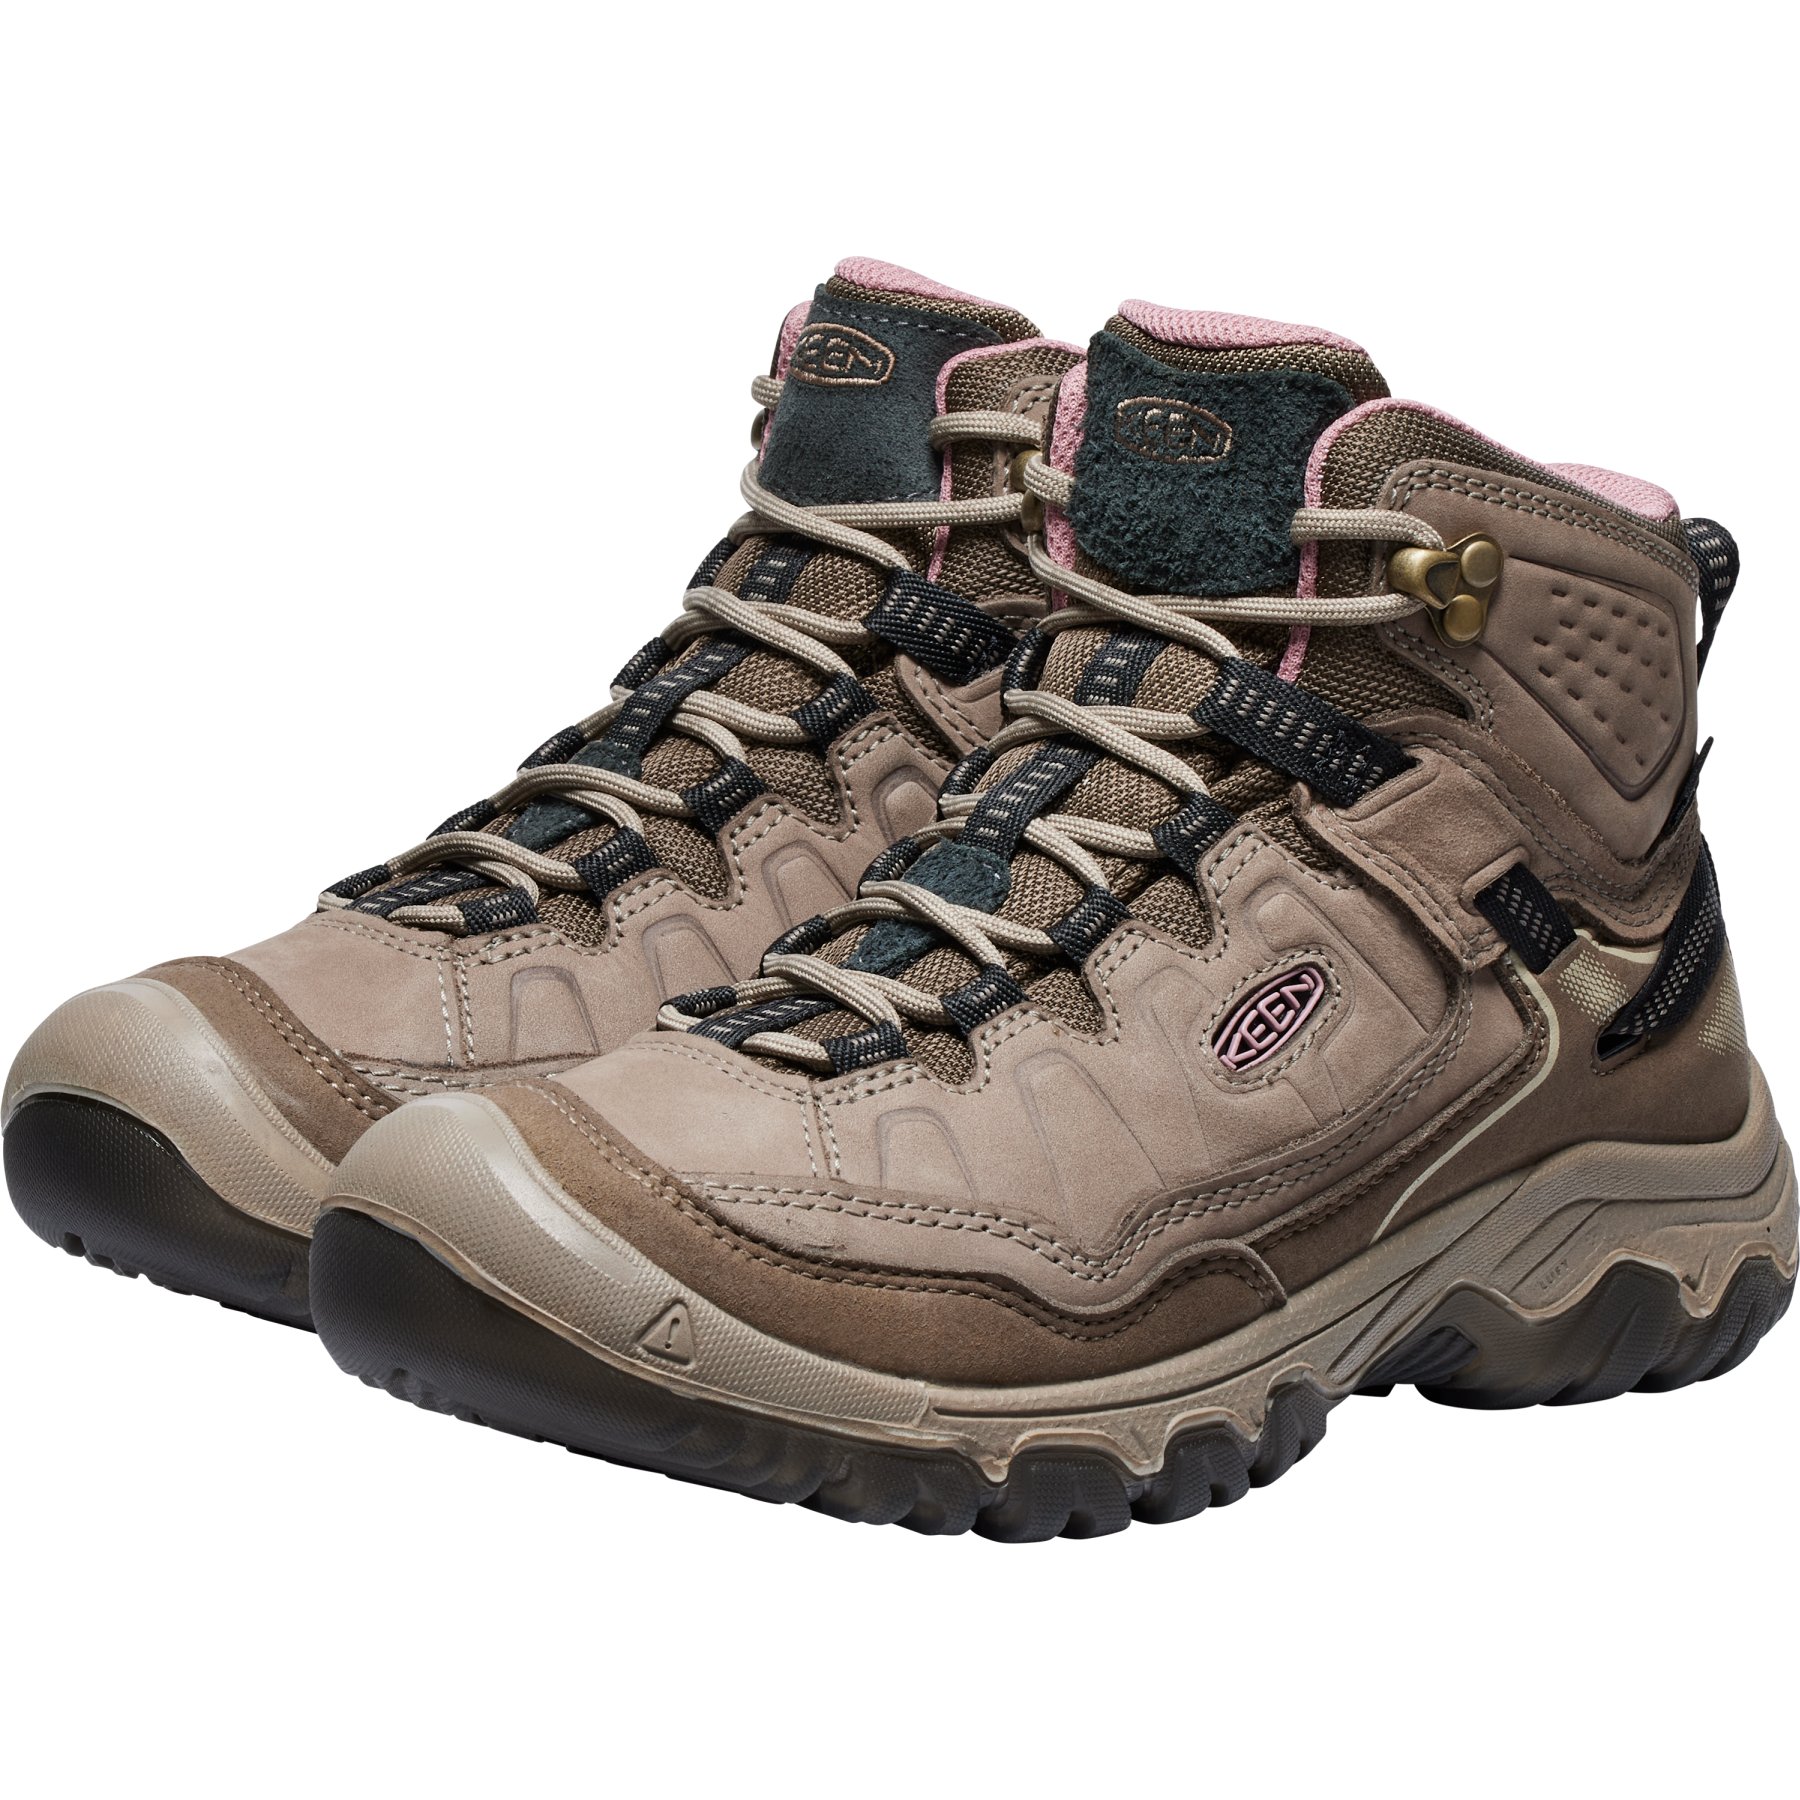 Picture of KEEN Targhee IV Mid Waterproof Hiking Boots Women - Brindle/Nostalgia Rose